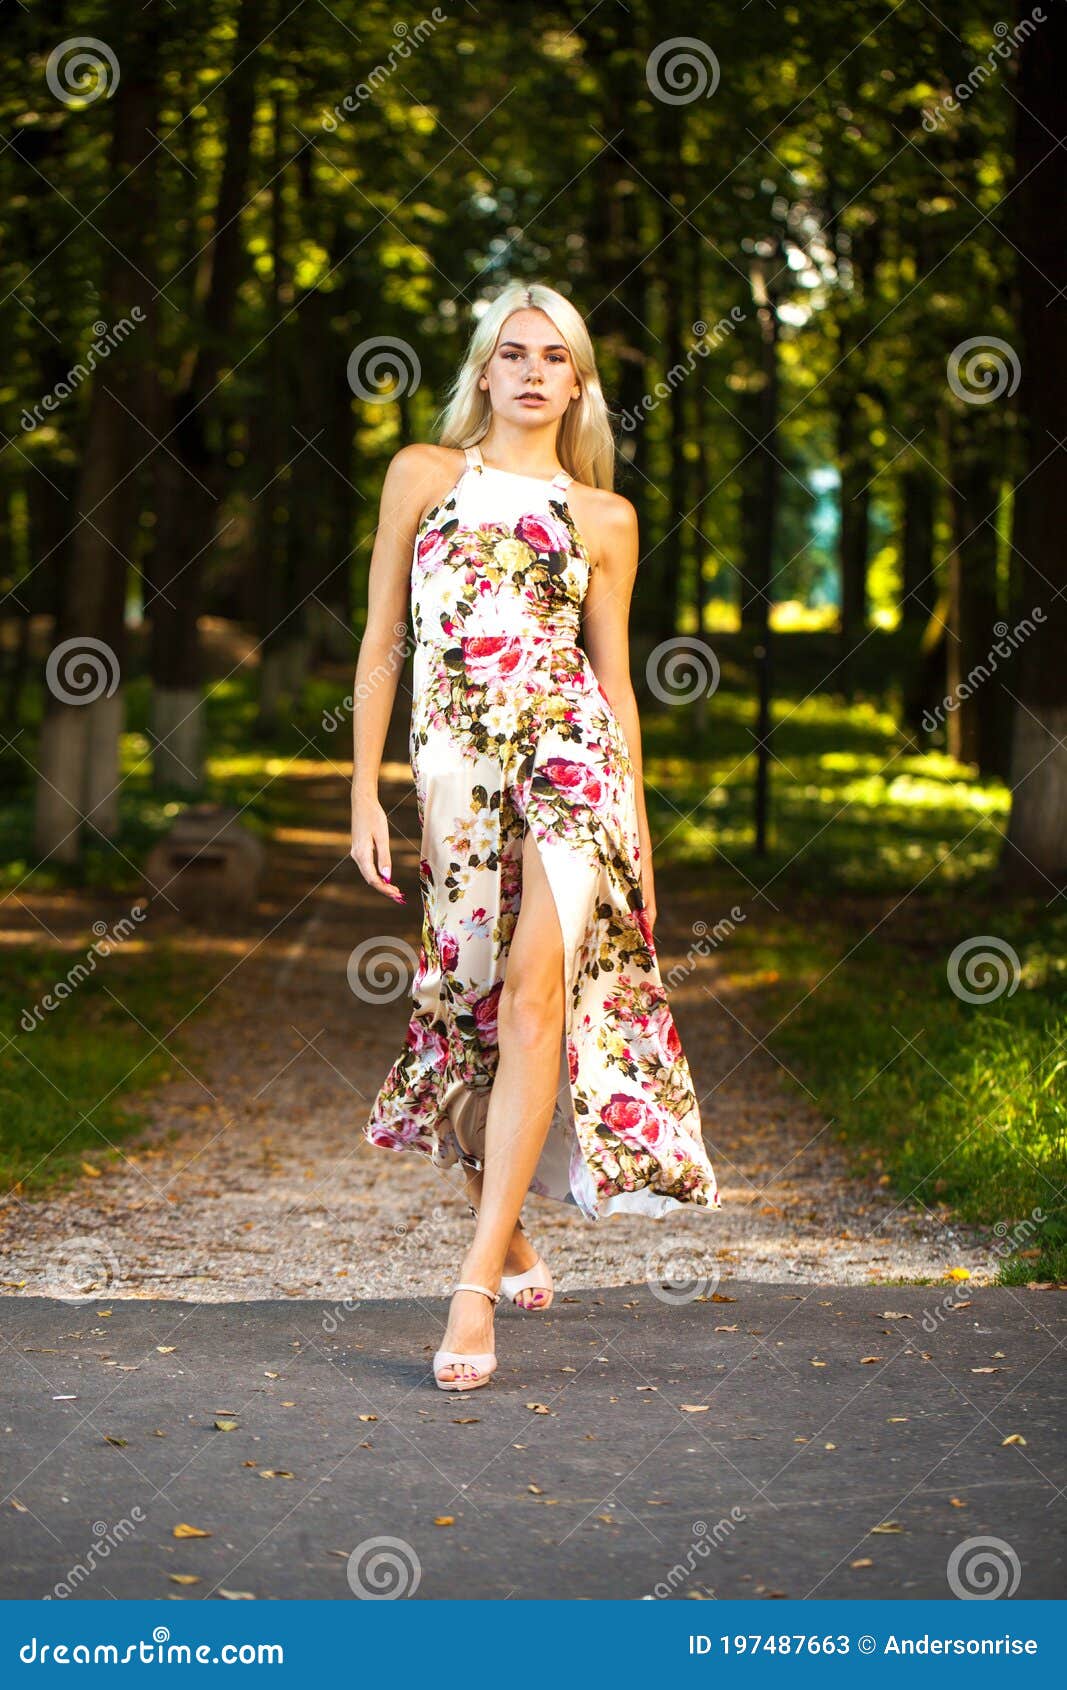 Full Body Portrait of a Young Blonde Girl Stock Image - Image of happy ...